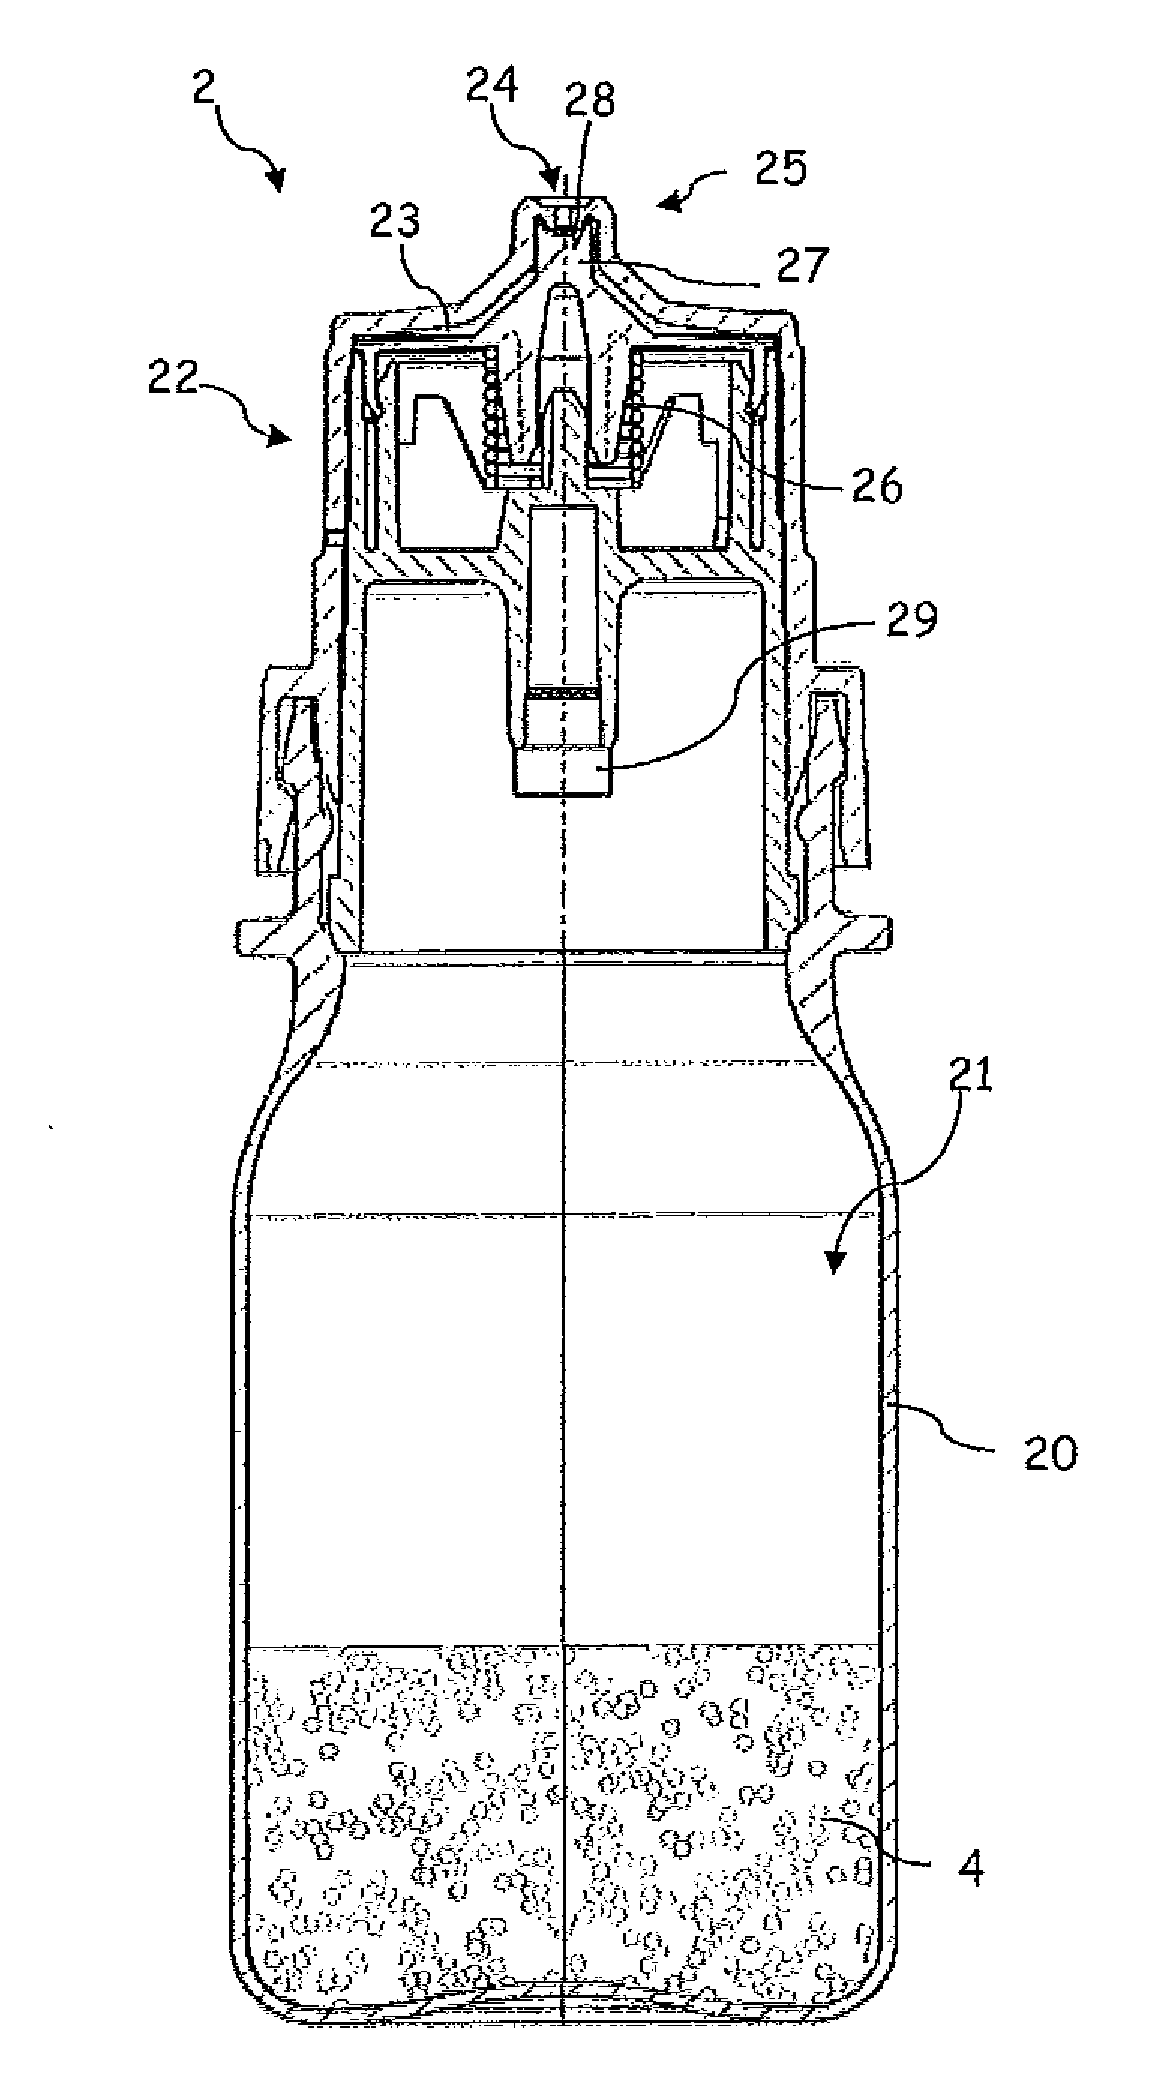 Protective cap for a dispenser and dispenser for discharging pharmaceutical and/or cosmetic liquids